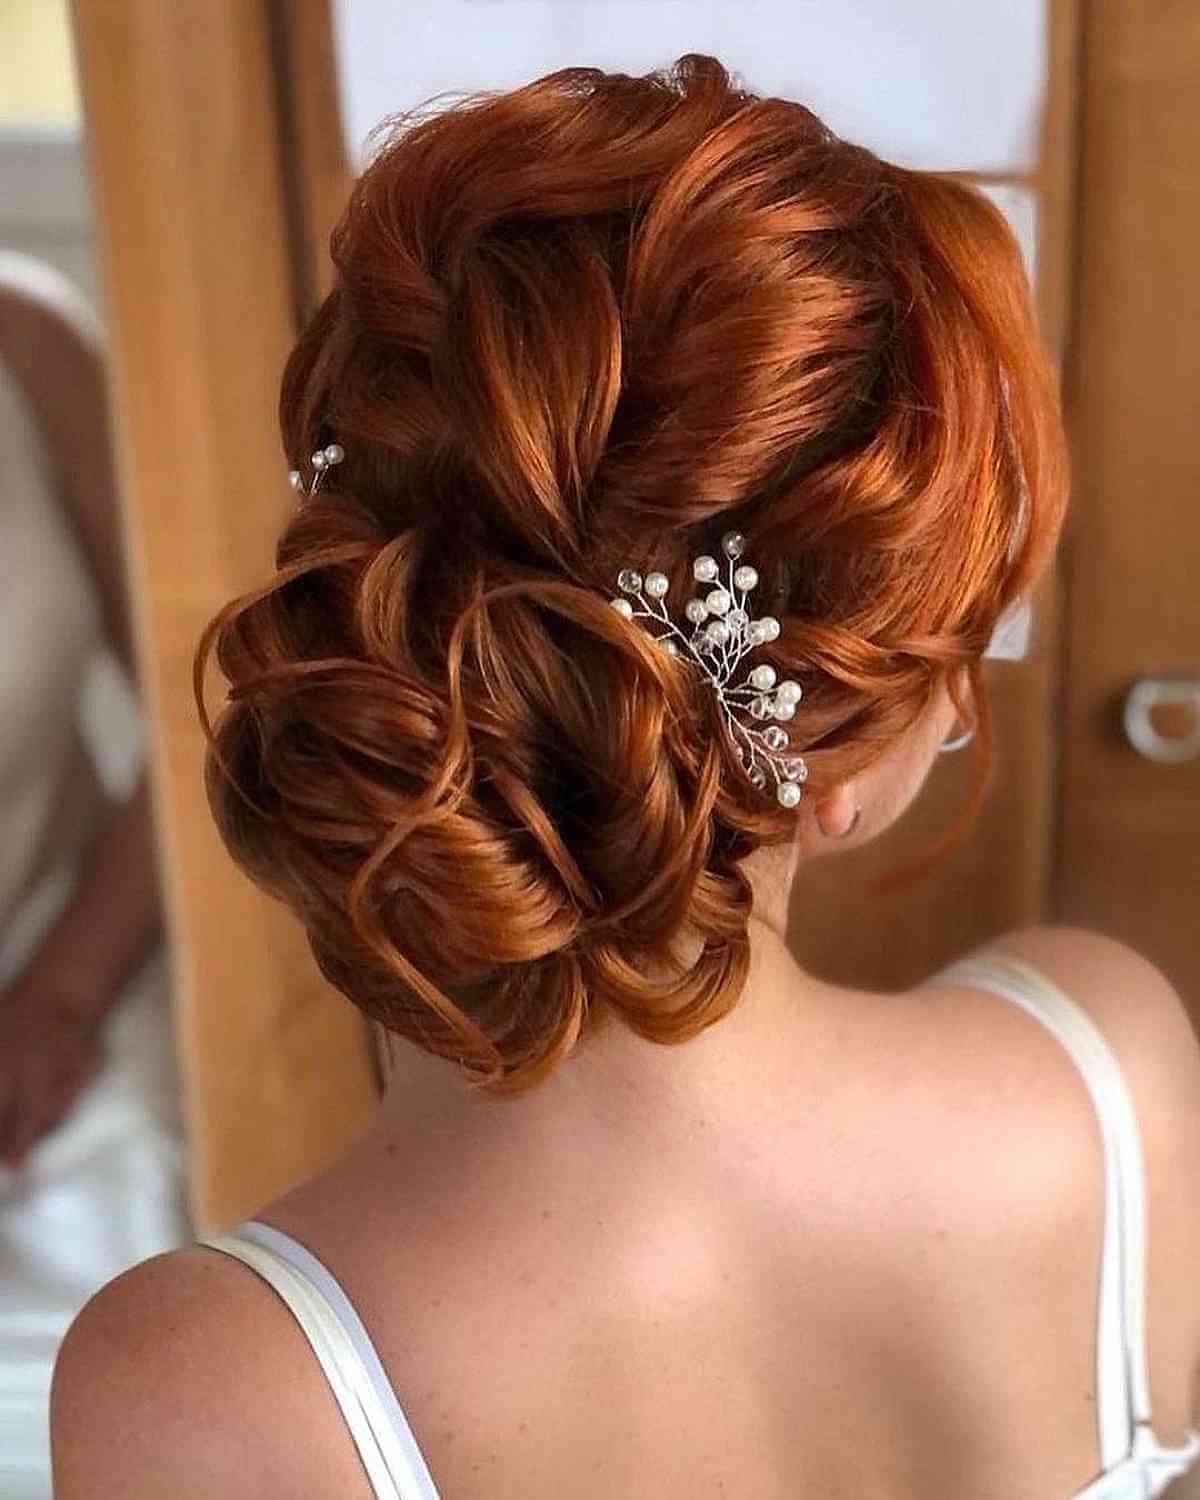 59 Gorgeous Wedding Hairstyles in 2022  Loose braided updo